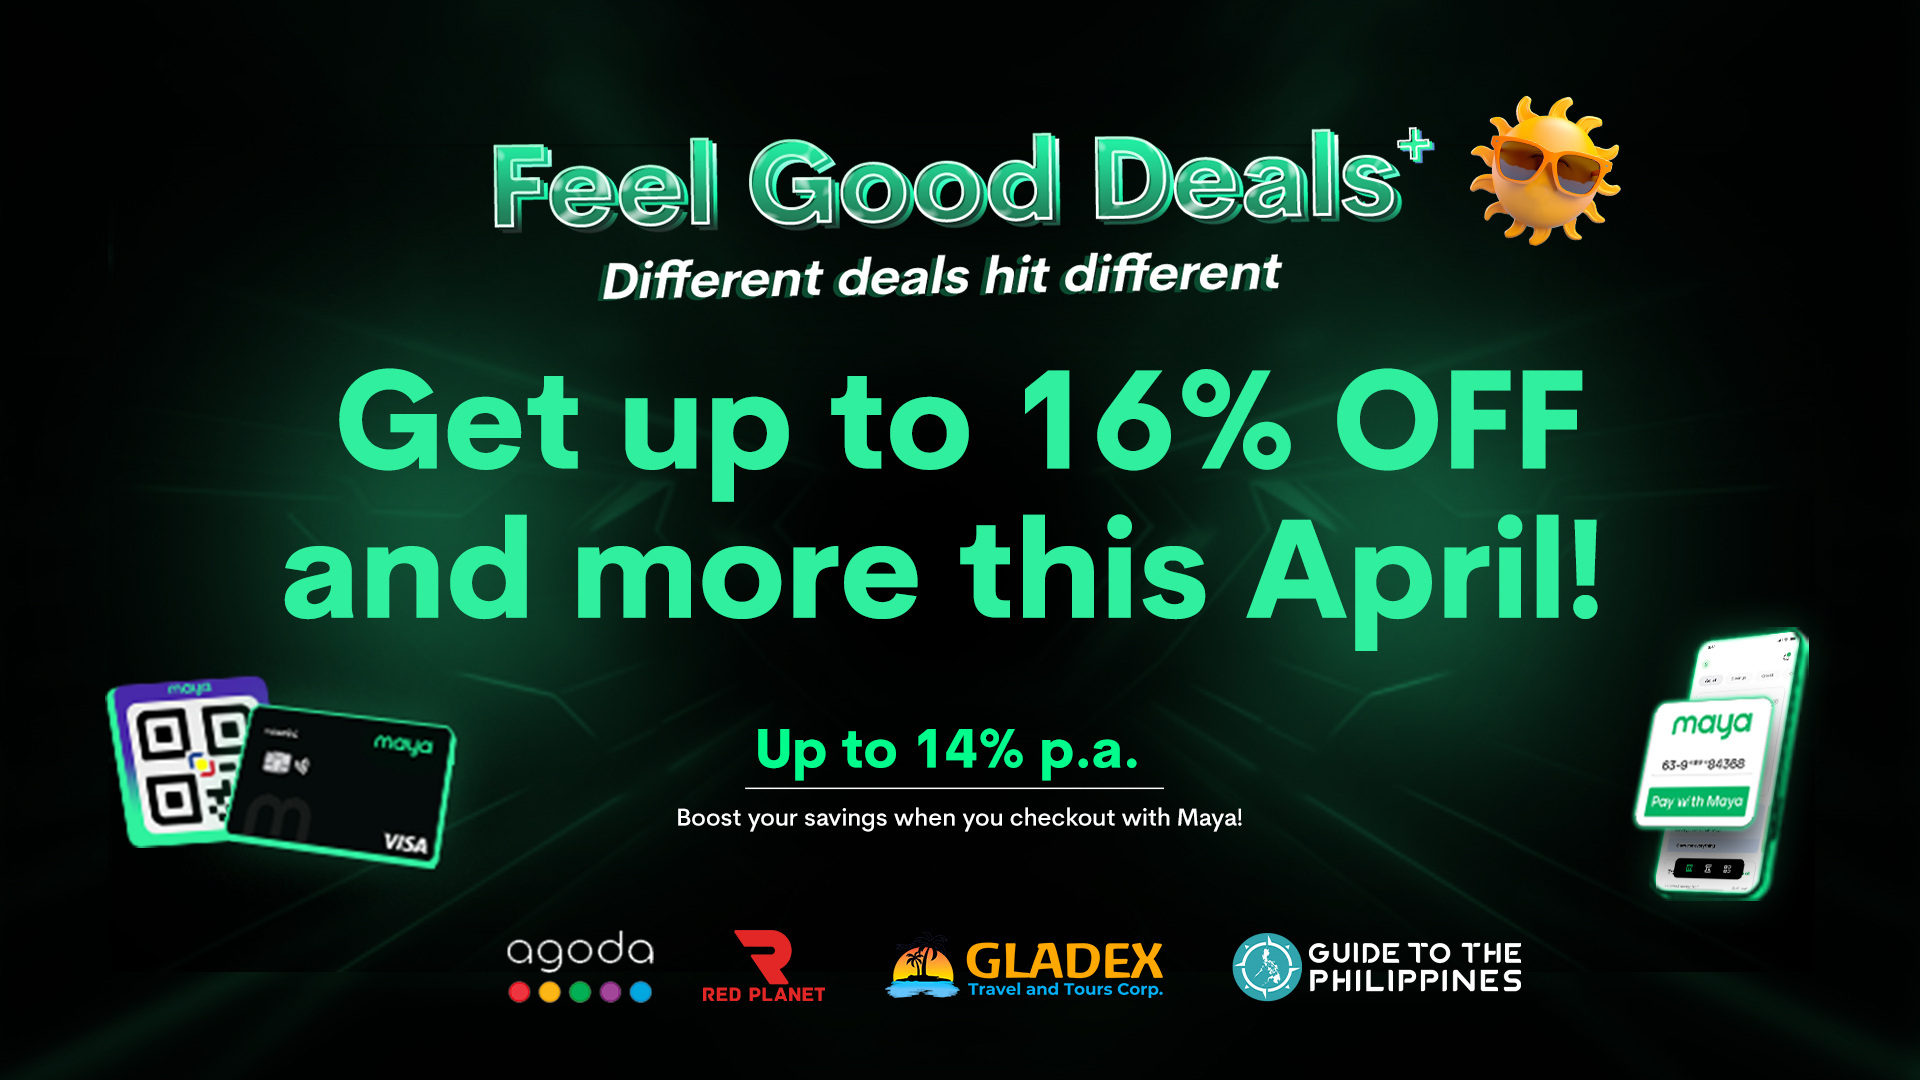 Feel Good with deals up to 16% OFF this April!